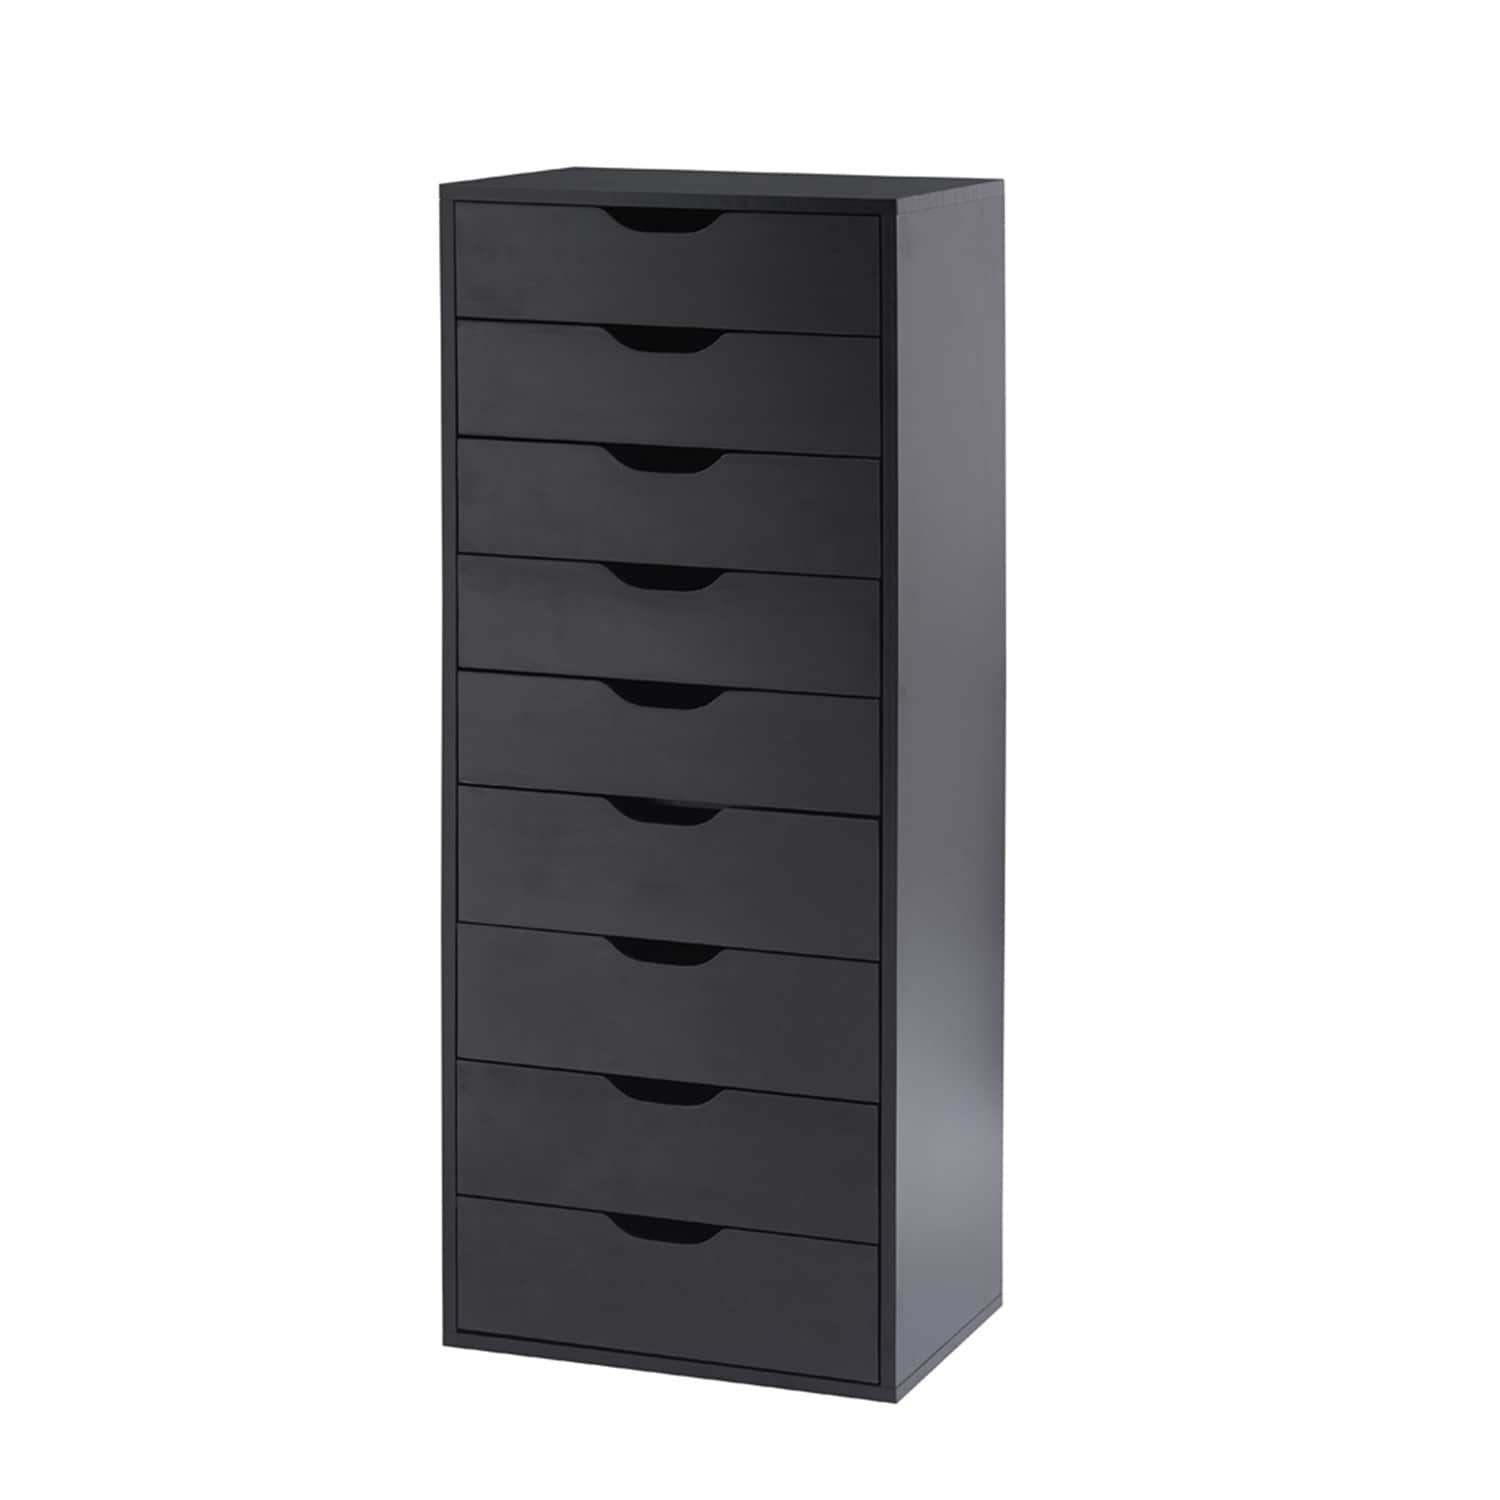 https://ak1.ostkcdn.com/images/products/is/images/direct/d0b369f88cd5560a074a7bdc9ac82ea4b5ead53c/9-Drawer-Office-Storage-Cabinet-by-Home-Imports-emporium.jpg